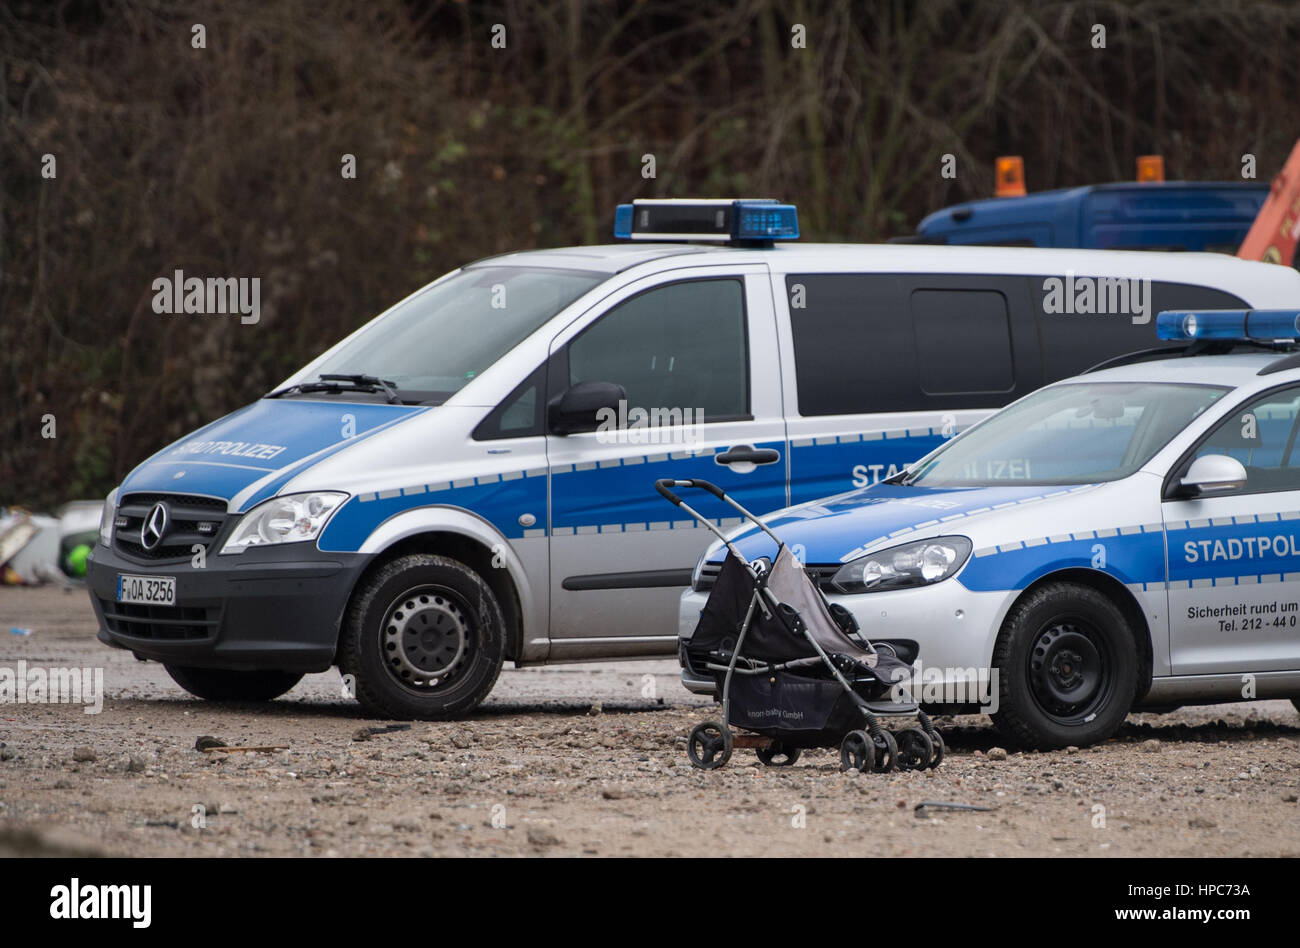 An empty stroller can be seen before two police vehicles on a commercial property in the Gutleutviertel district on the outskirts of Frankfurt am Main, Germany, 21 February 2017. The handbuilt huts of the property's residents have been torn down. Several dozen Romanians were living in the wooden sheds. Photo: Susann Prautsch/dpa Stock Photo